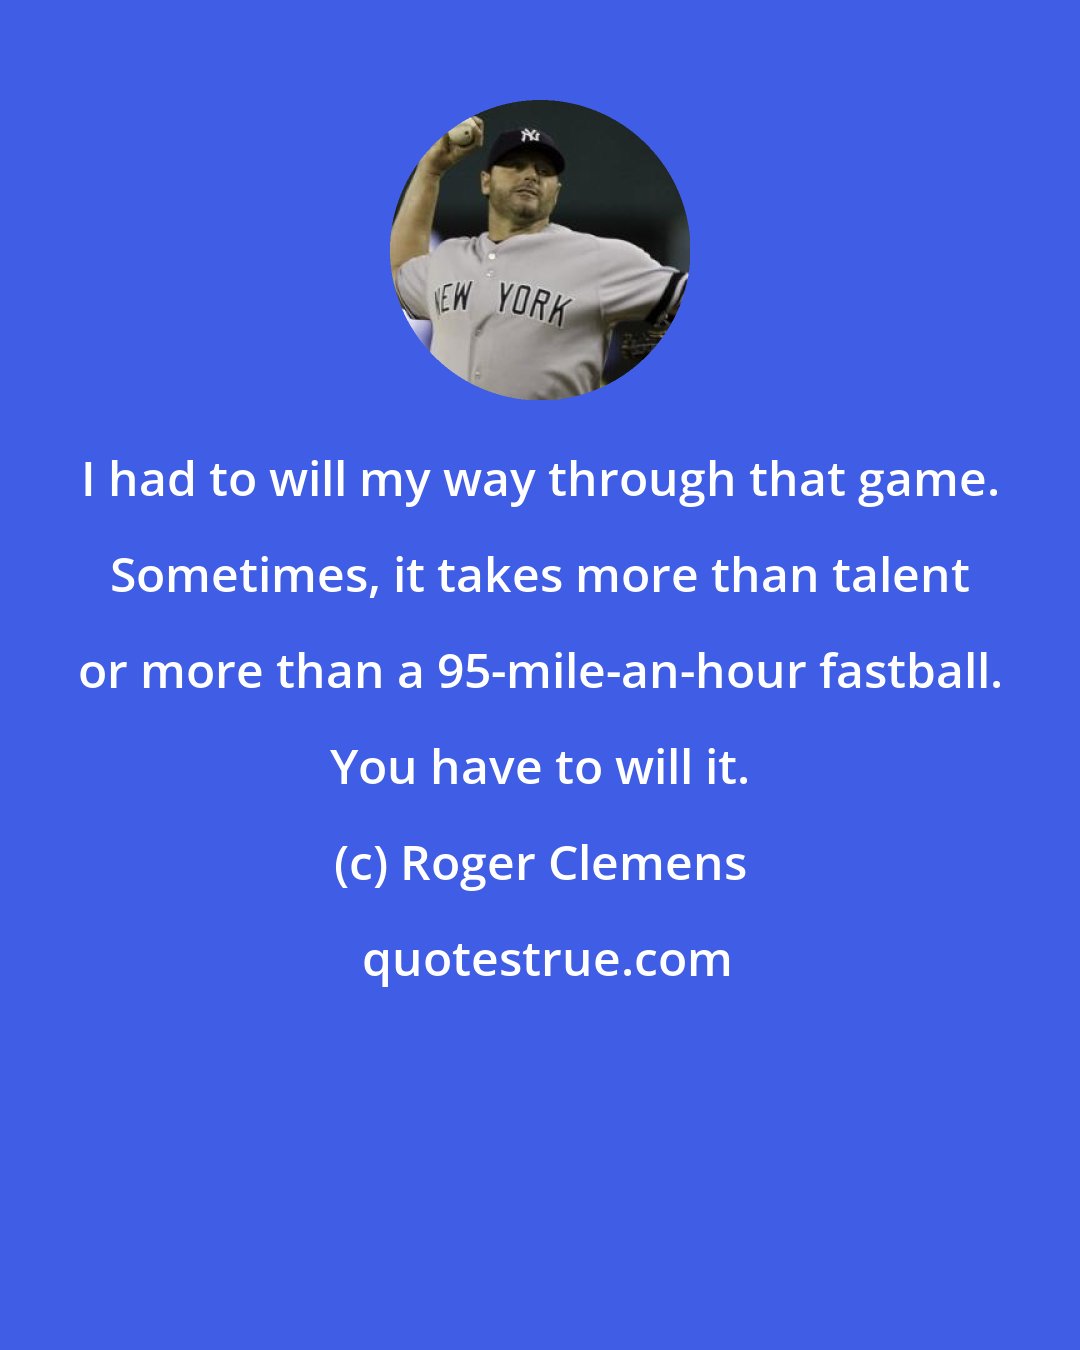 Roger Clemens: I had to will my way through that game. Sometimes, it takes more than talent or more than a 95-mile-an-hour fastball. You have to will it.